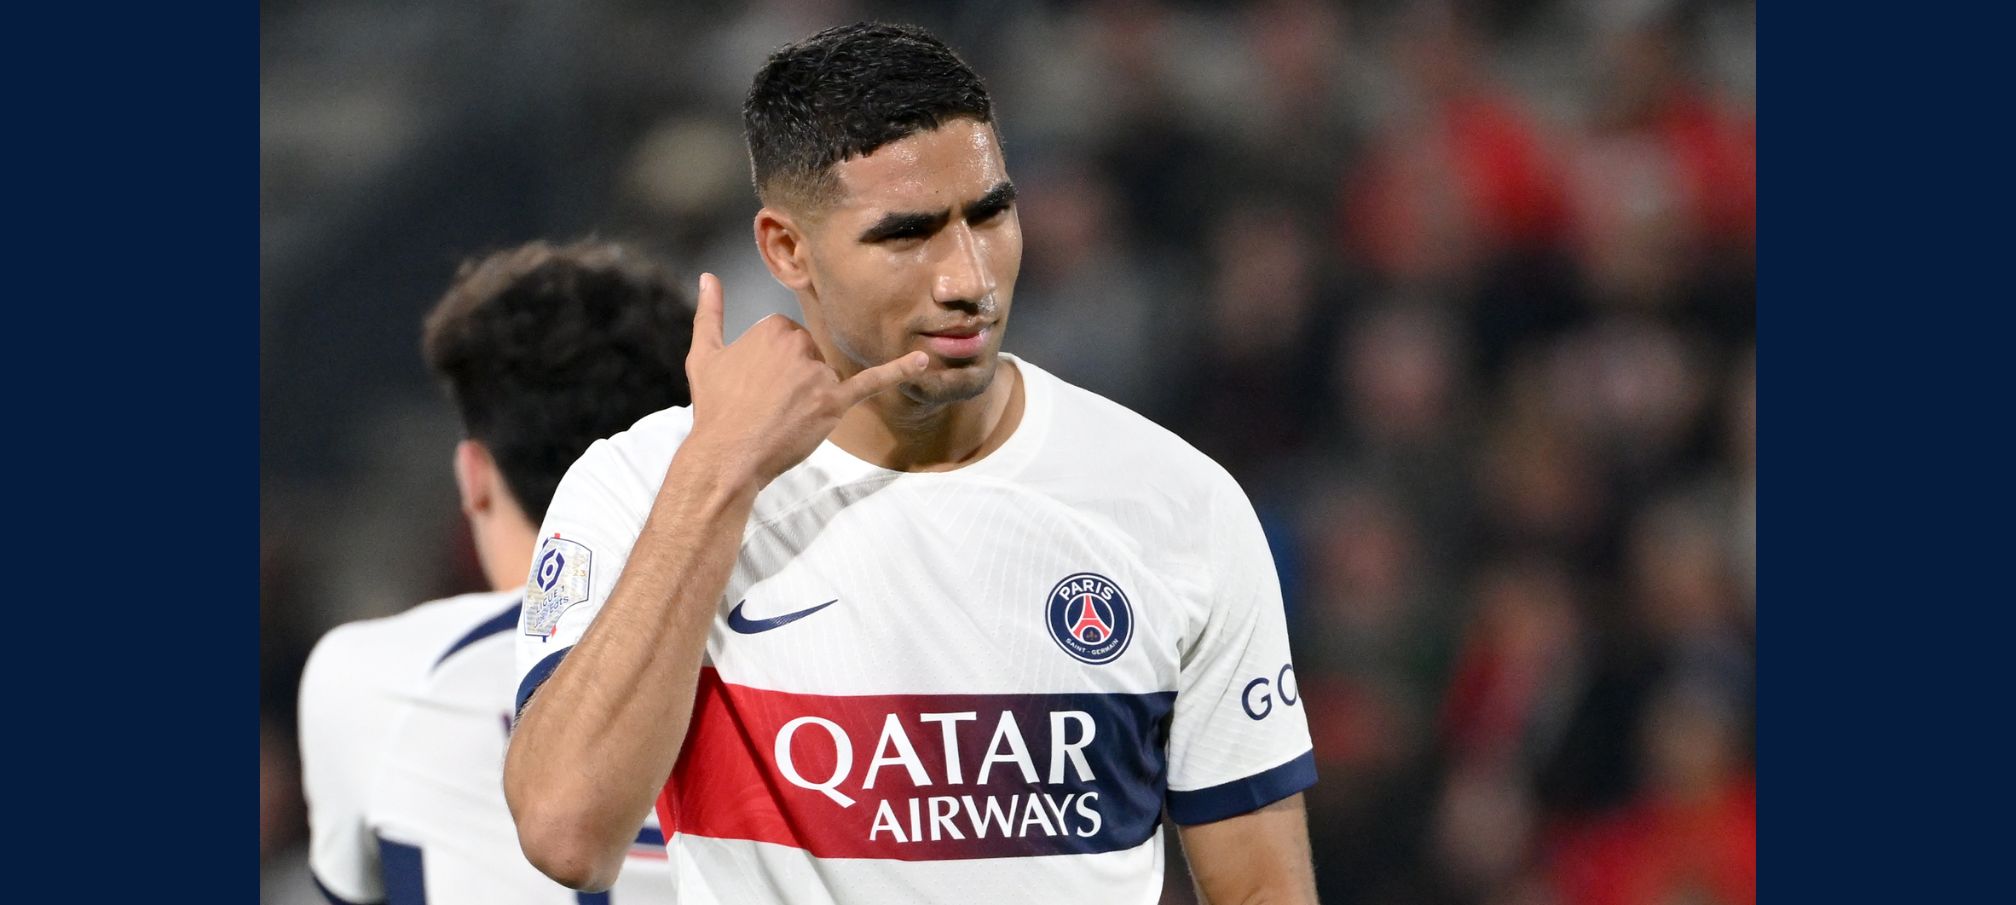 PSG return to winning ways and end Rennes' unbeate